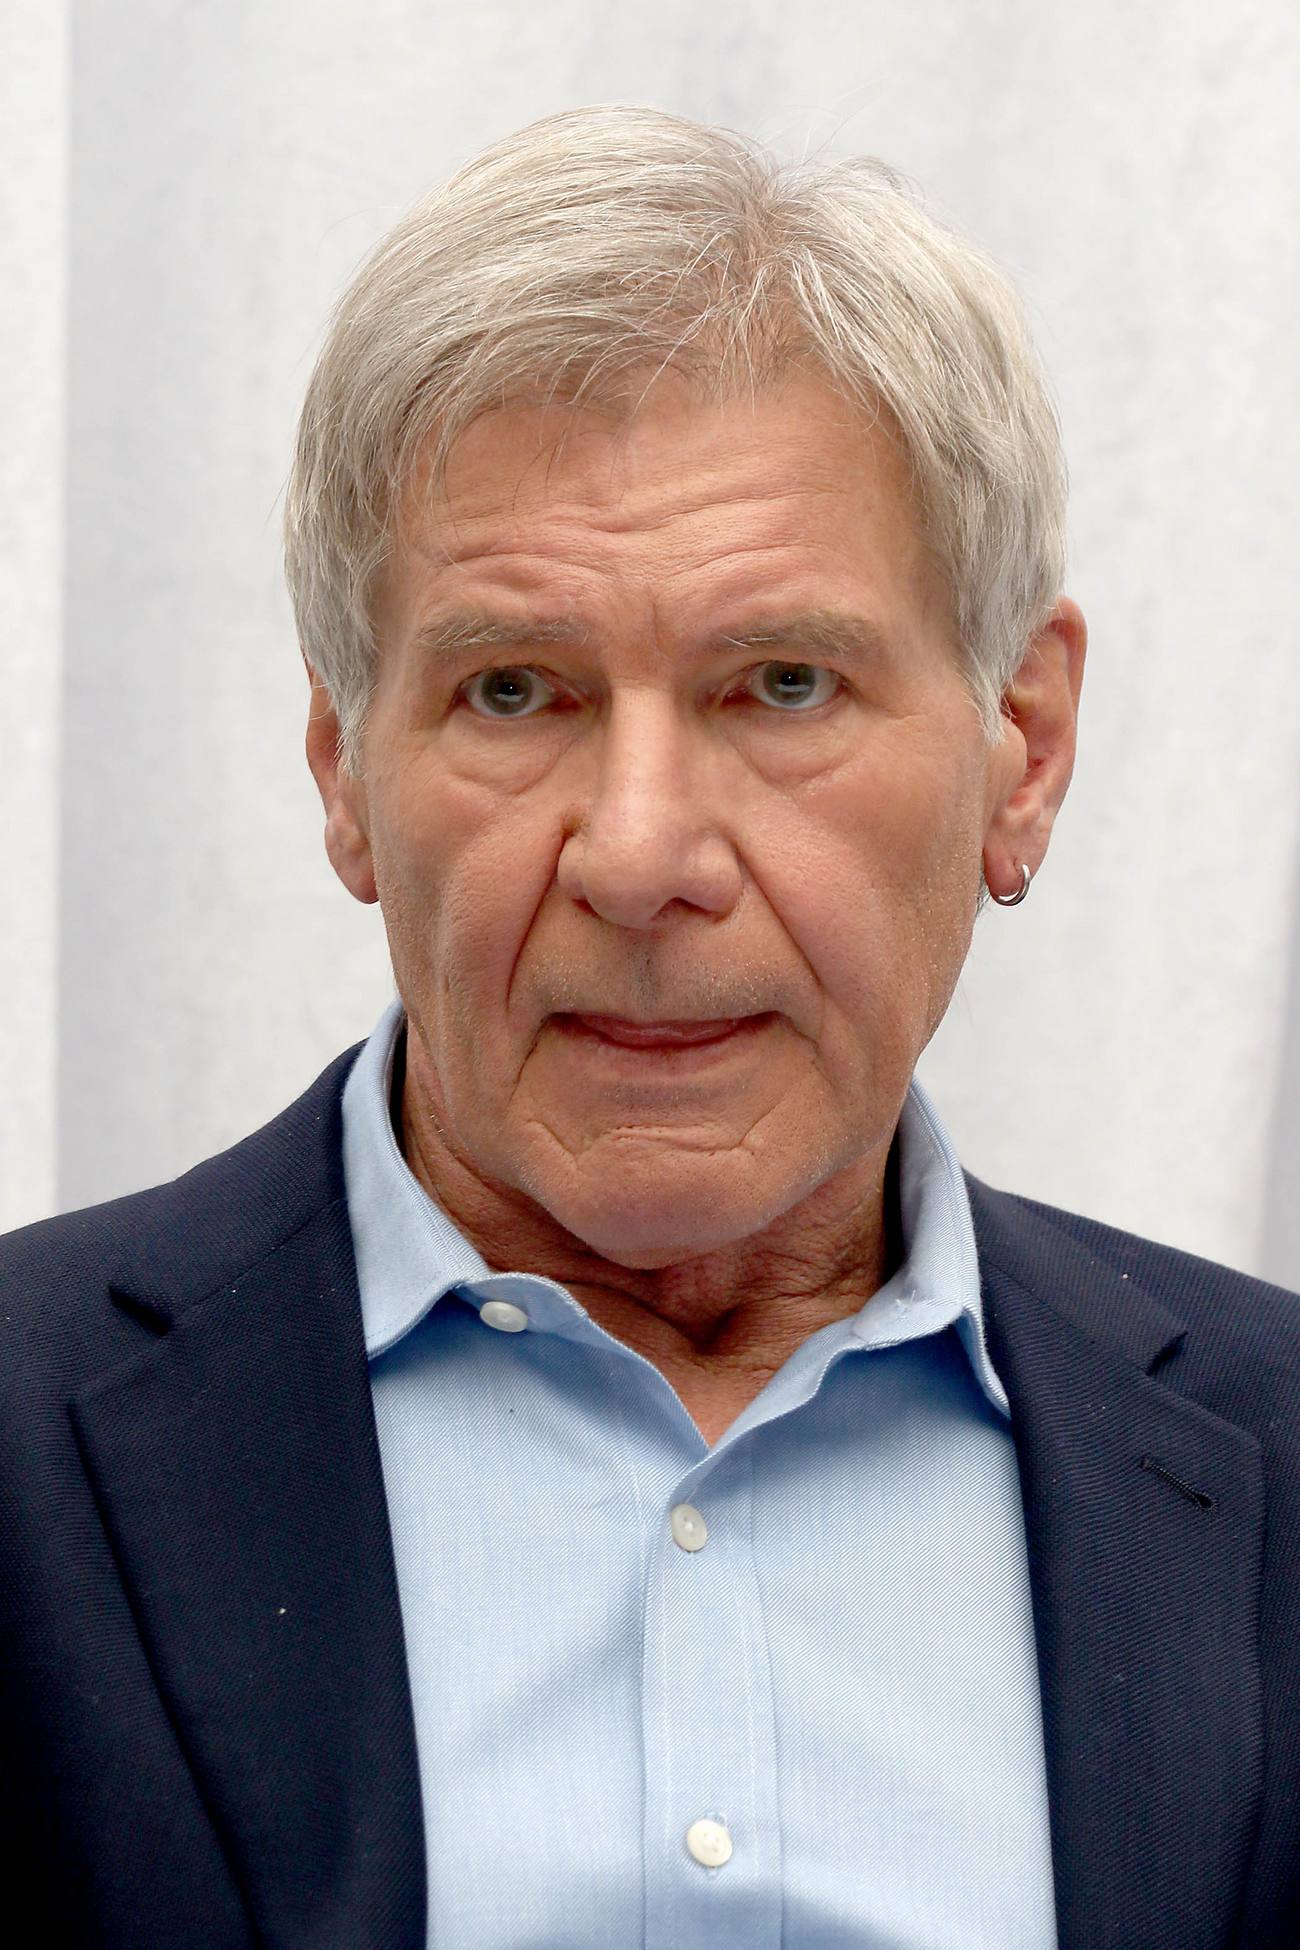 Harrison Ford at Press Conference for Star Wars: The Force Awakens